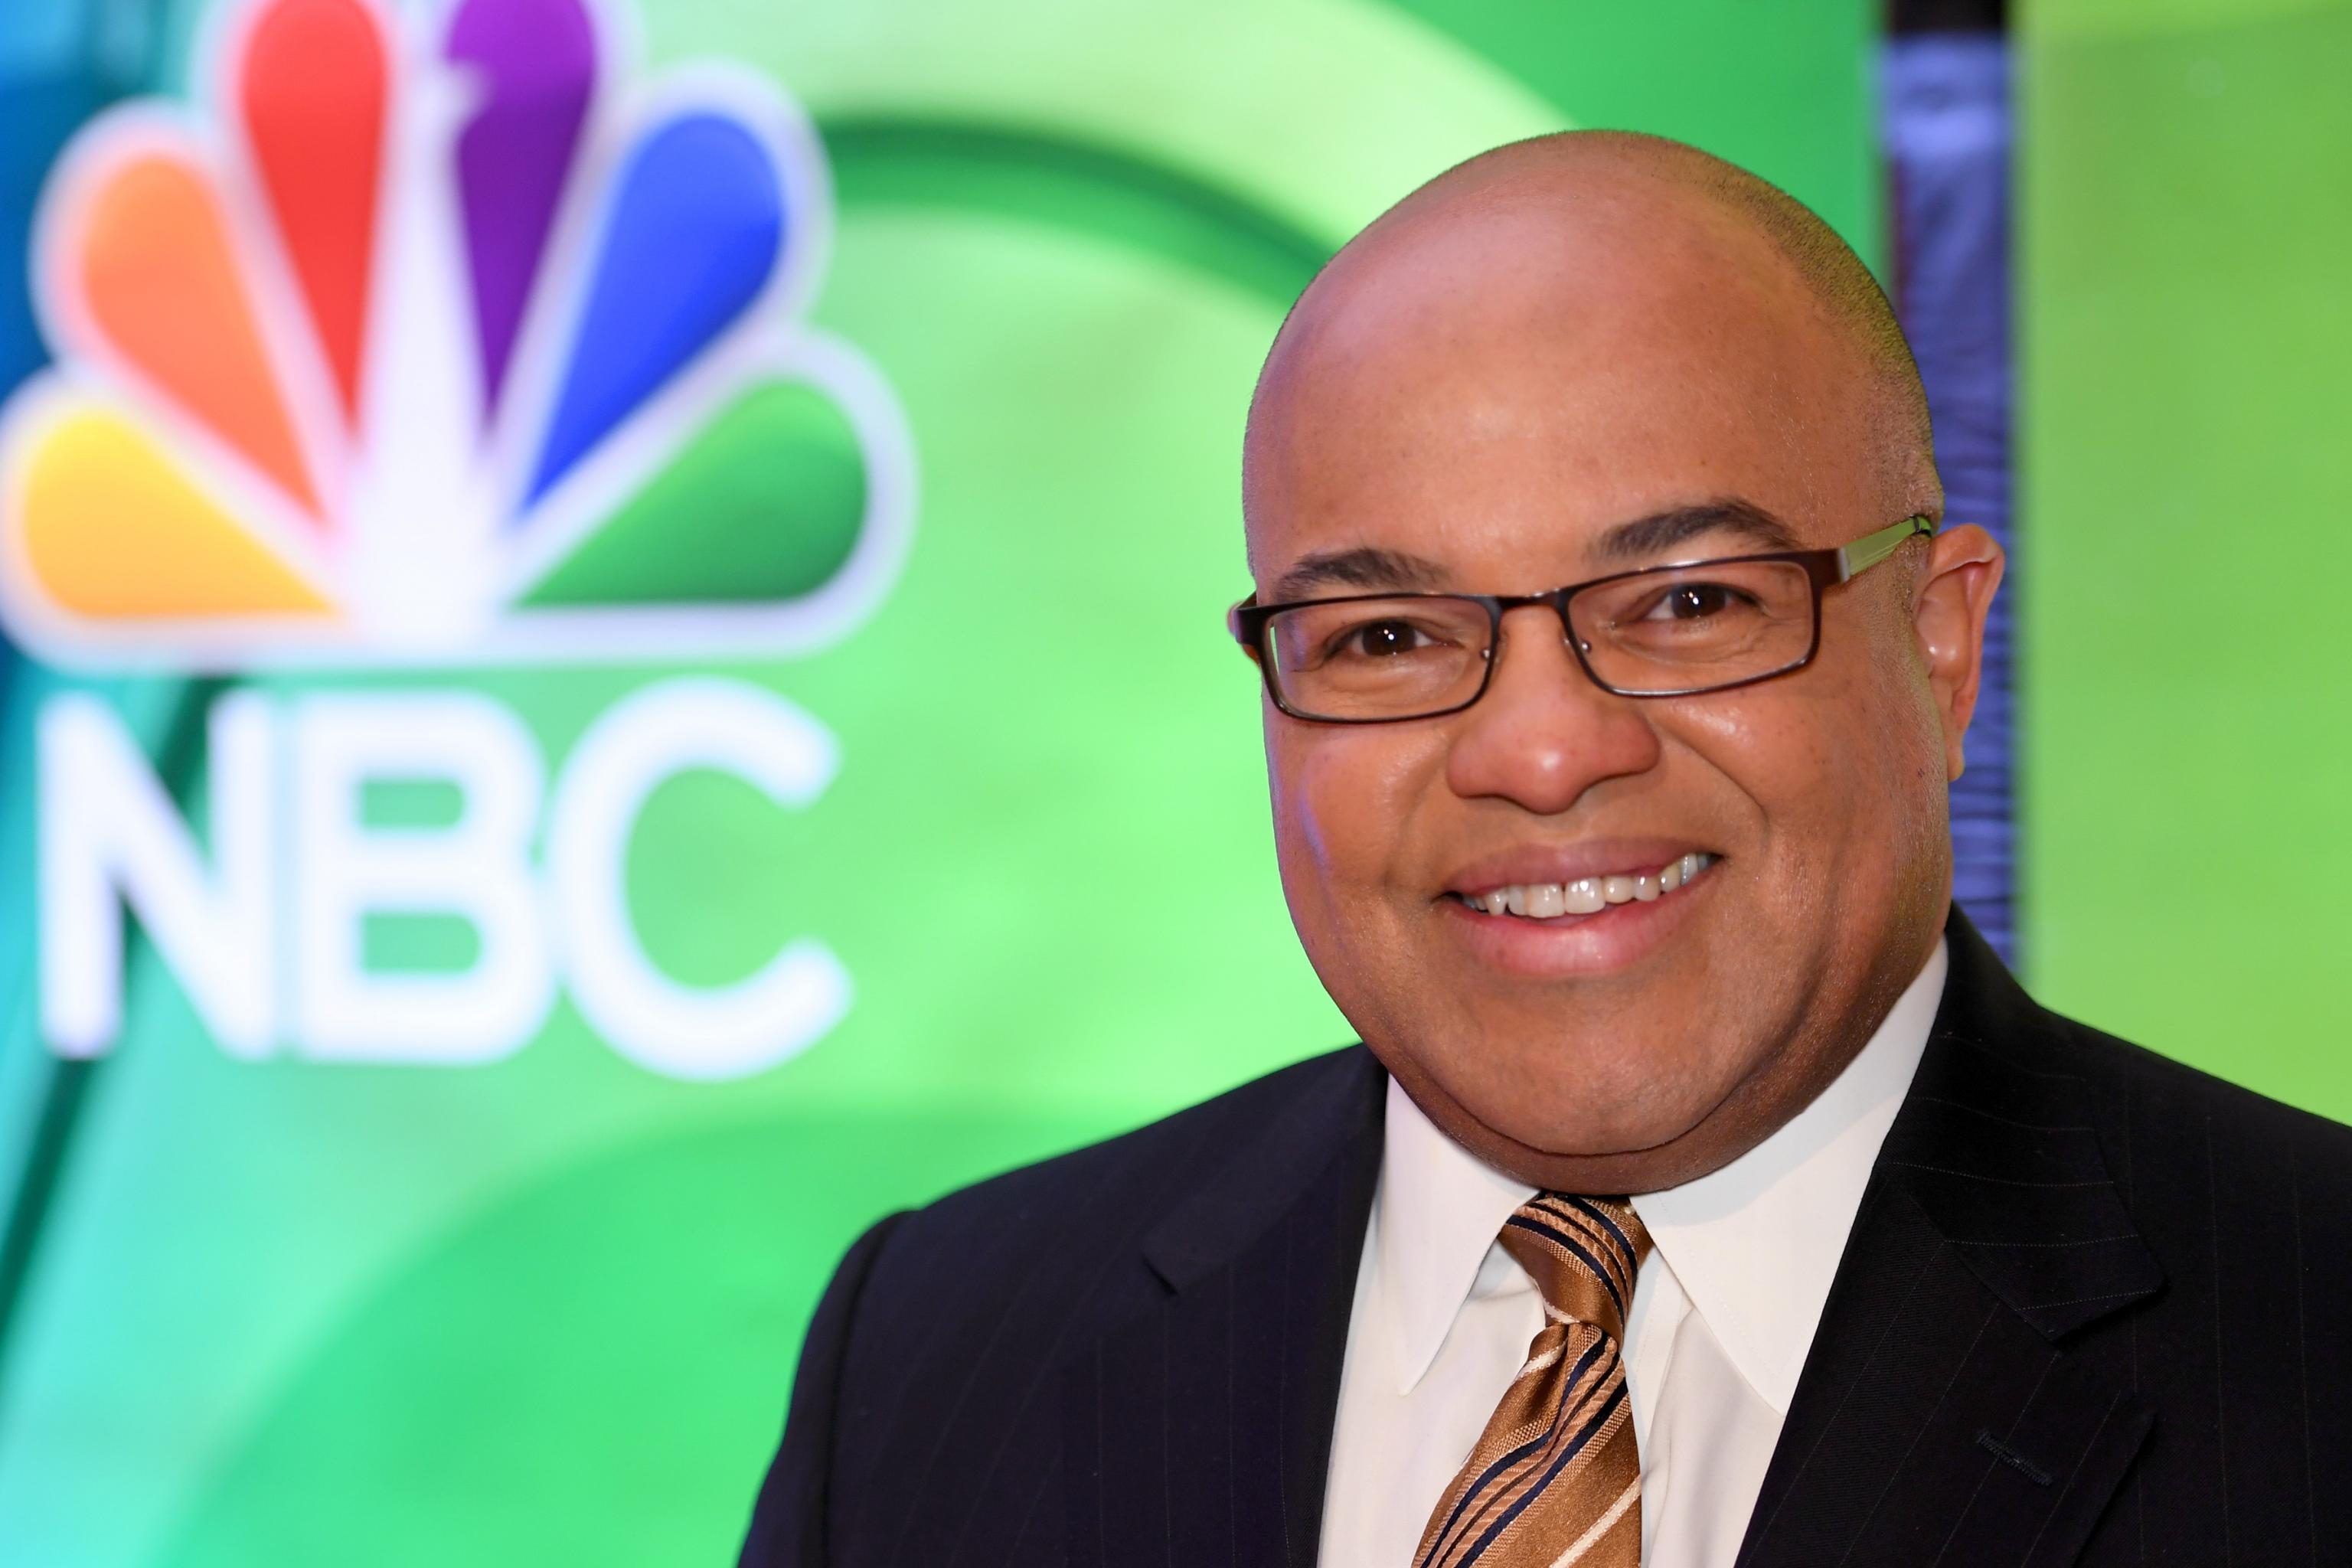 Mike Tirico to join Cris Collinsworth on NBC's 'Sunday Night Football'